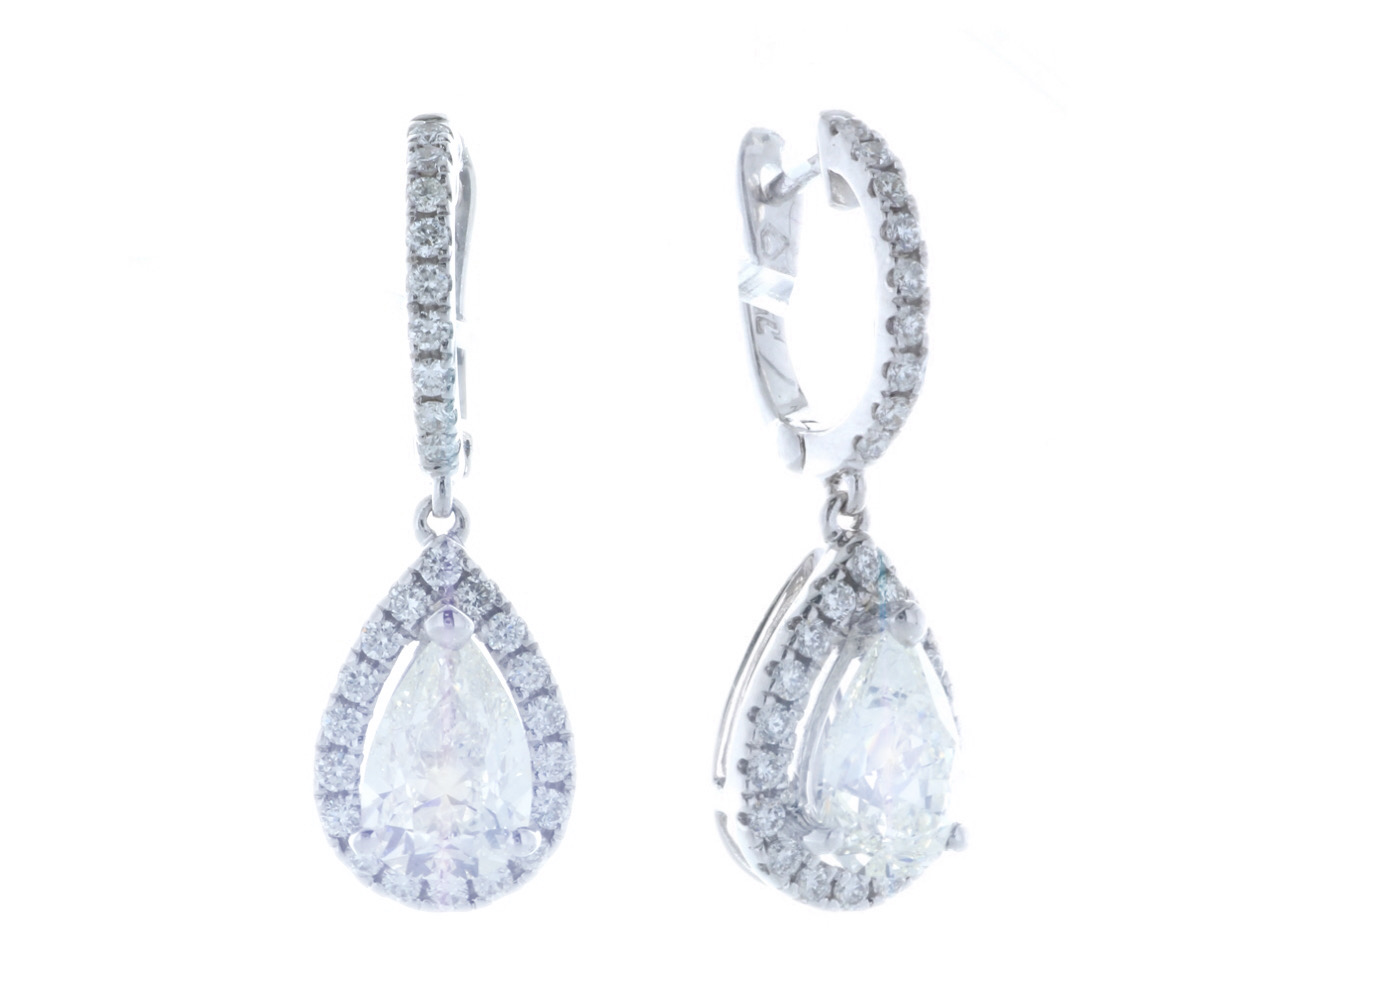 18ct White Gold Pear Shape Halo Drop Earring 2.47 Carats - Image 2 of 3